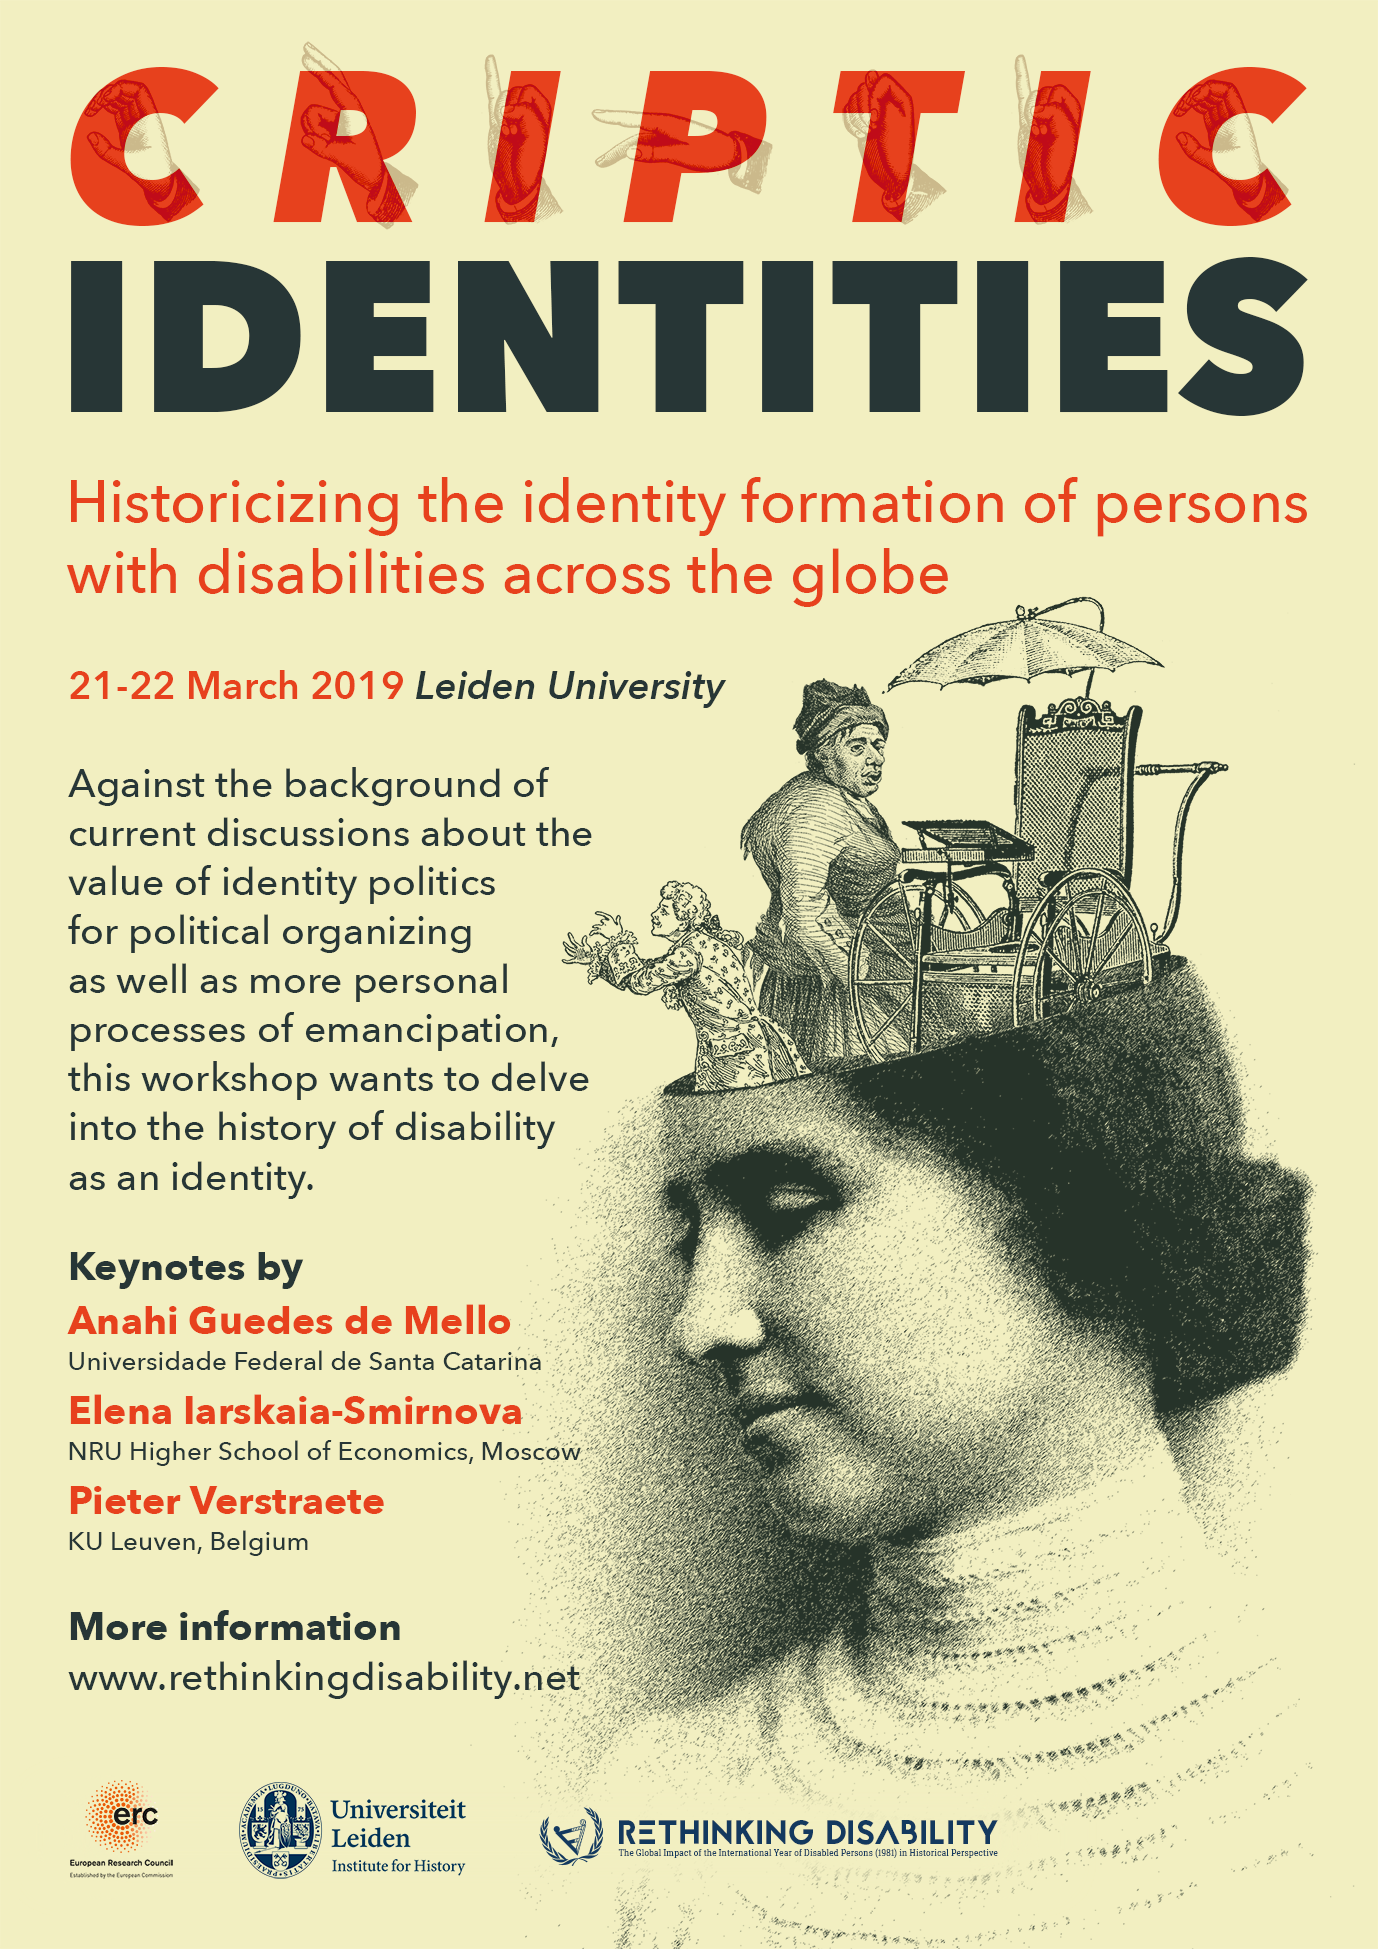 Criptic identities: historicizing the identity formation of persons with disabilities across the globe